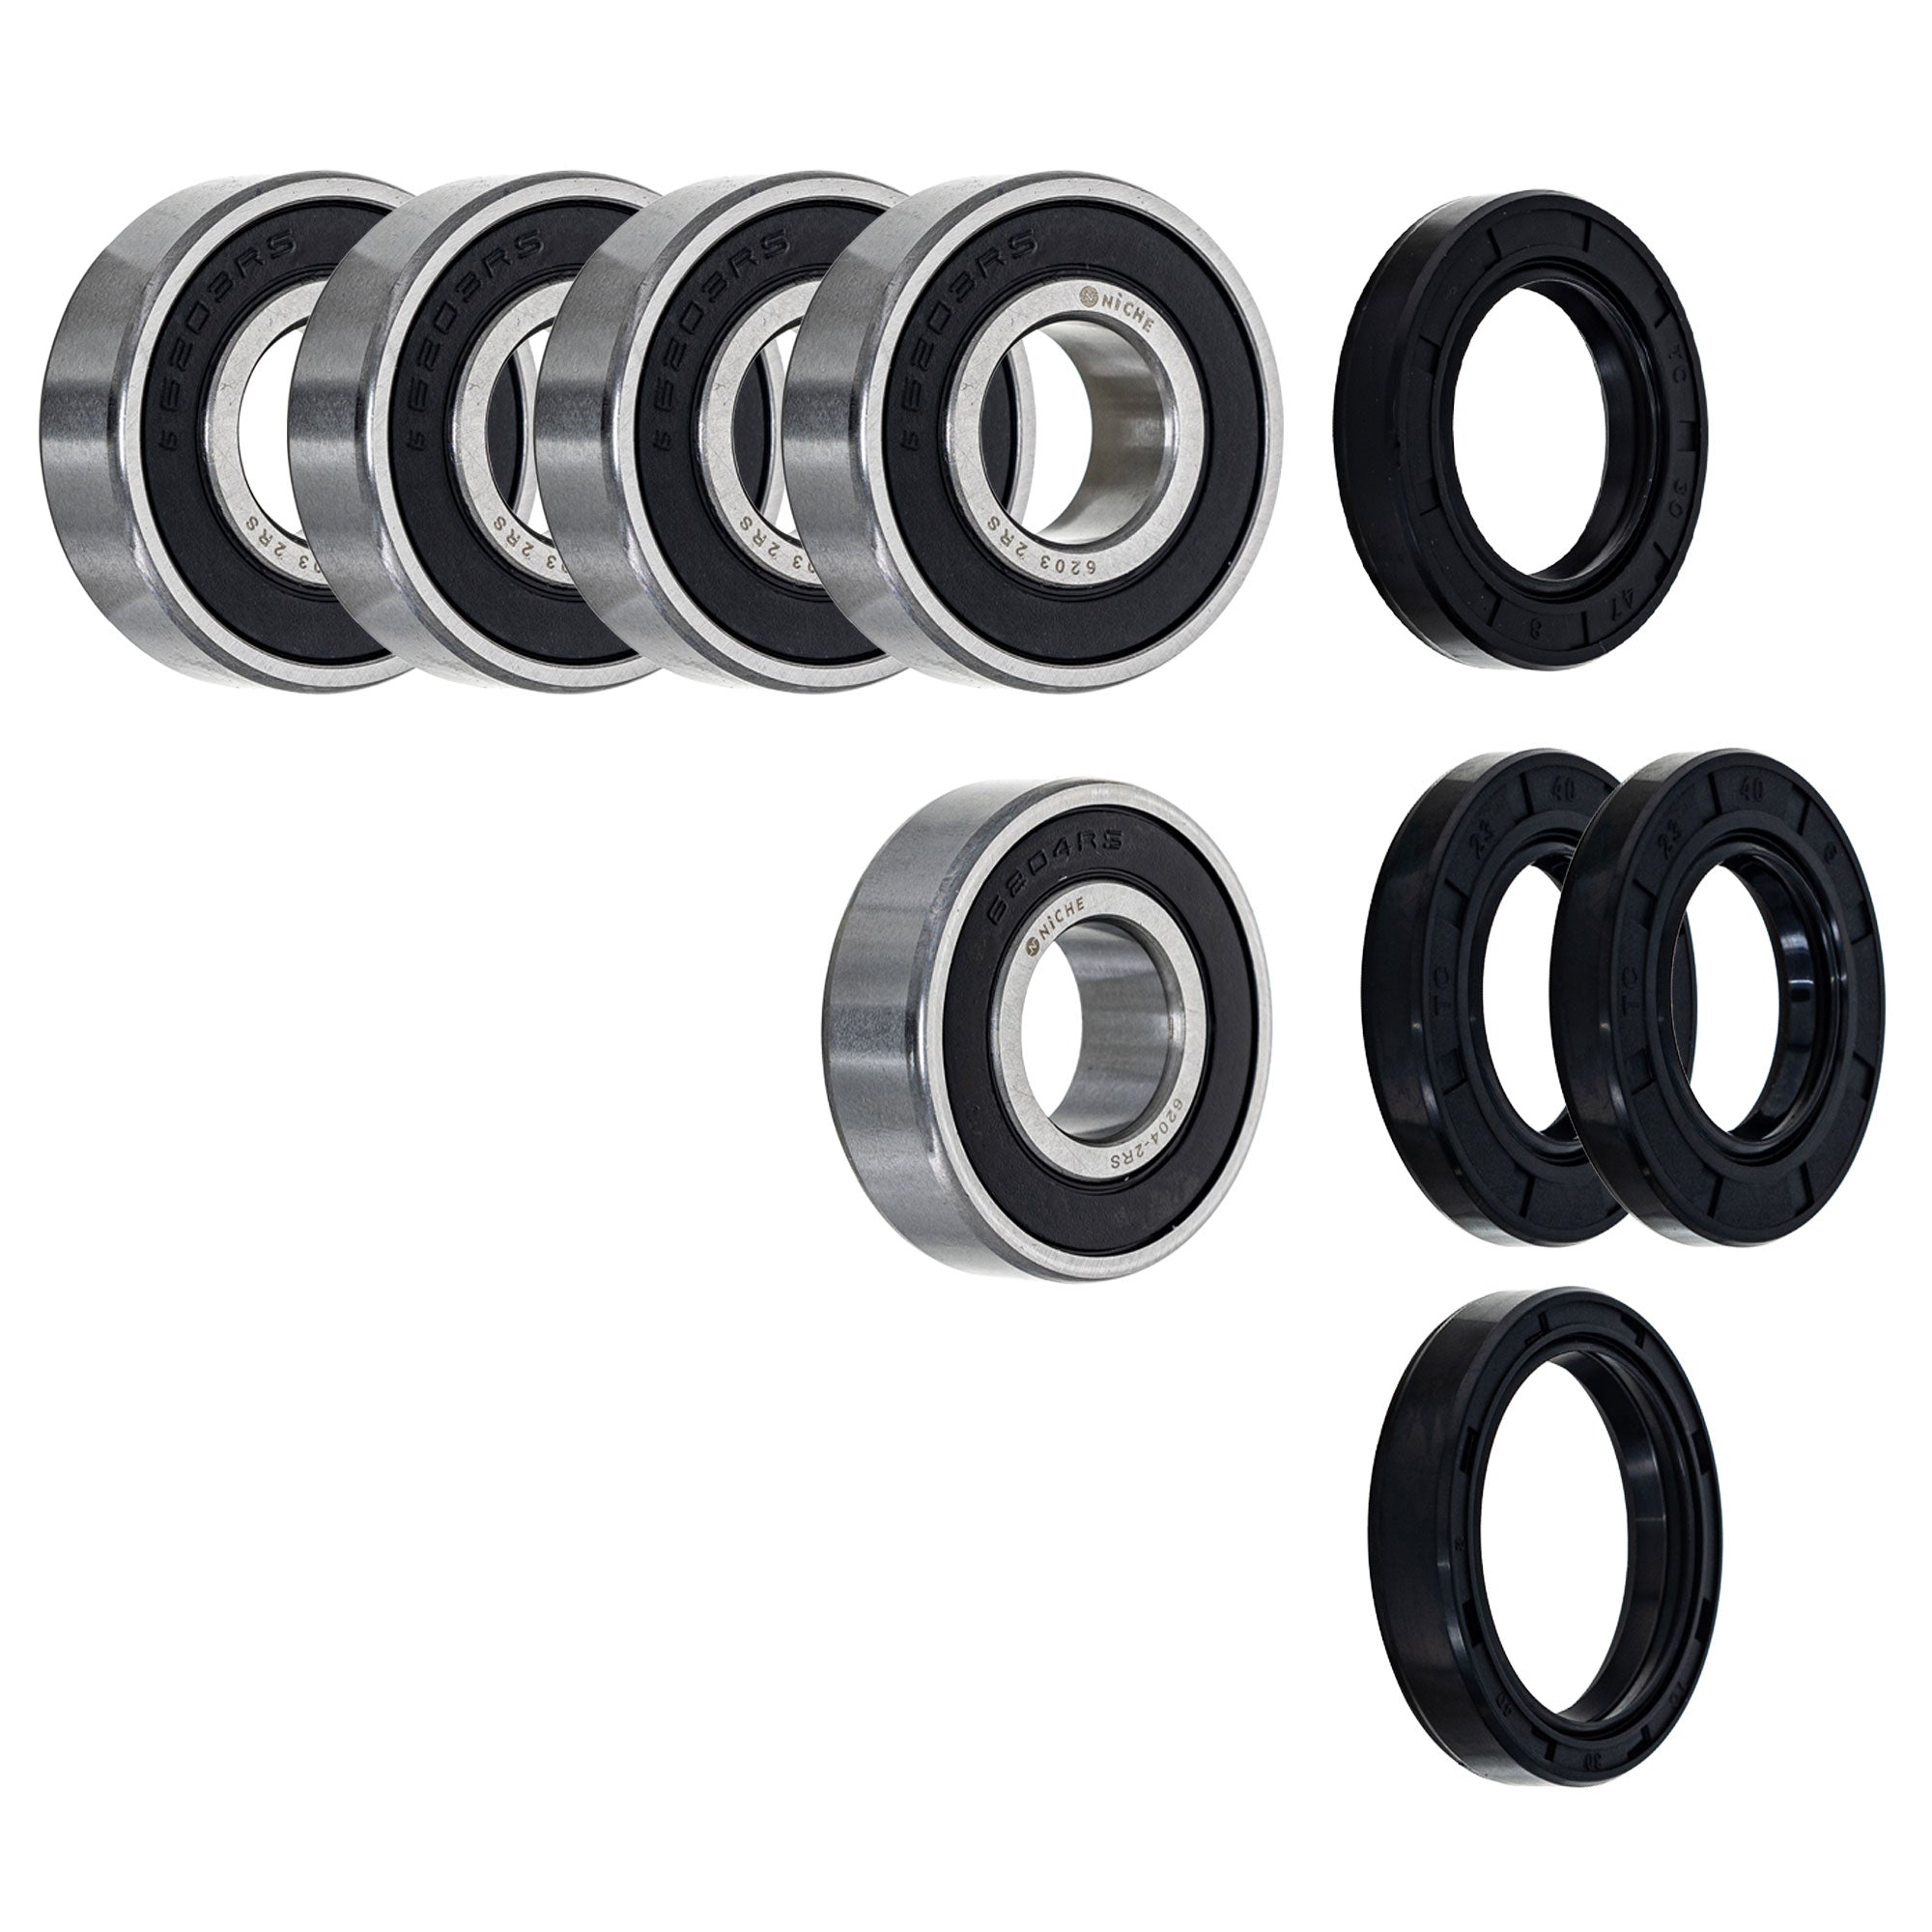 Wheel Bearing Seal Kit for zOTHER Ref No F650ST F650 NICHE MK1008457